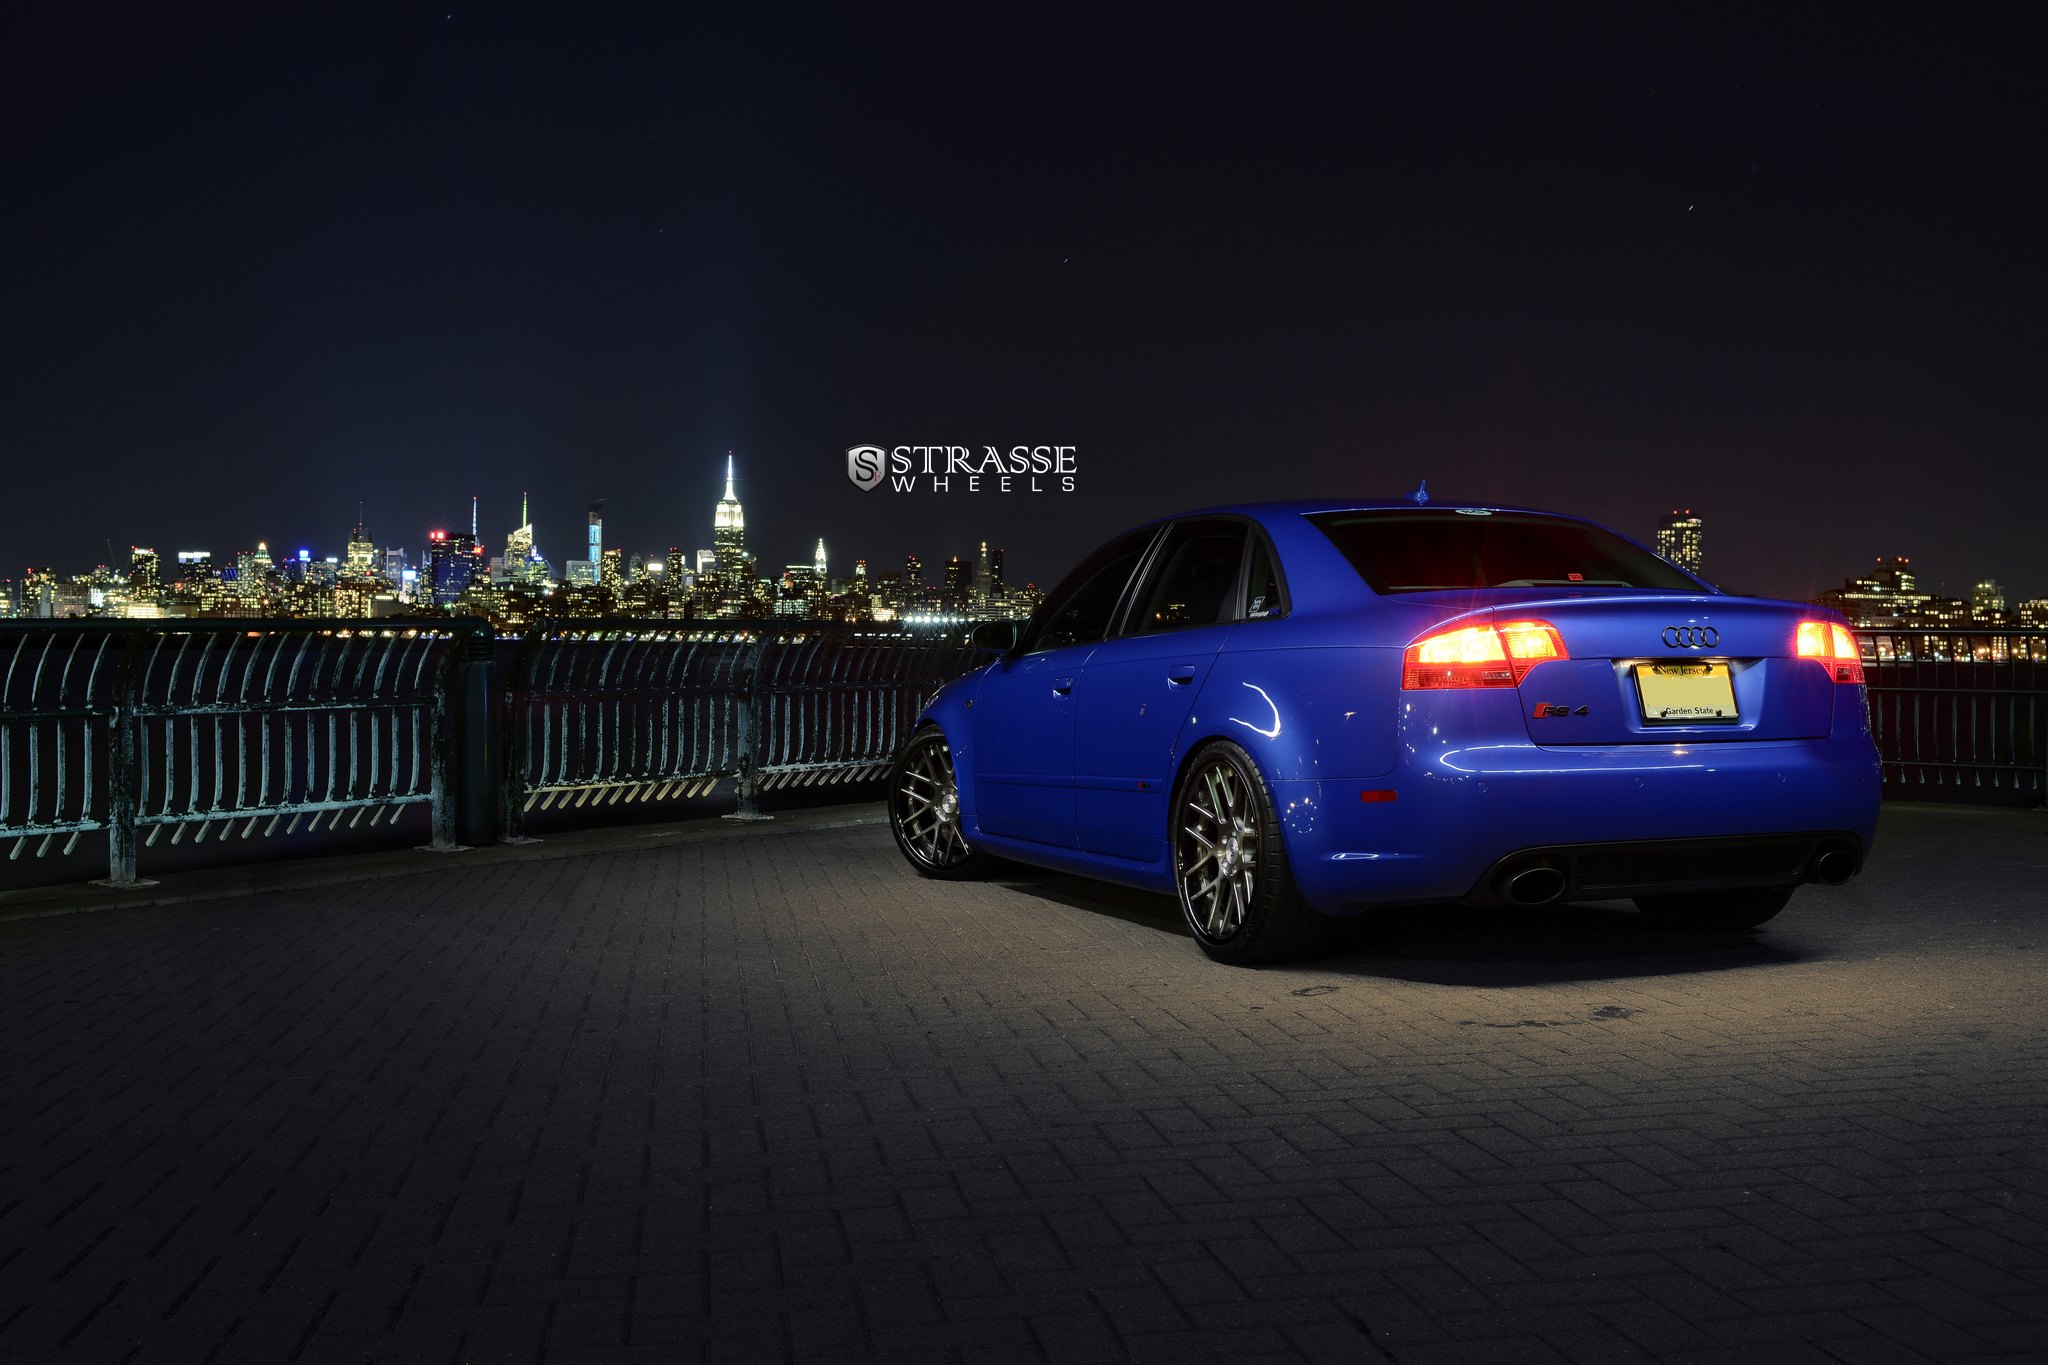 Aftermarket Rear Diffuser on Blue Audi S4 - Photo by Strasse Forged